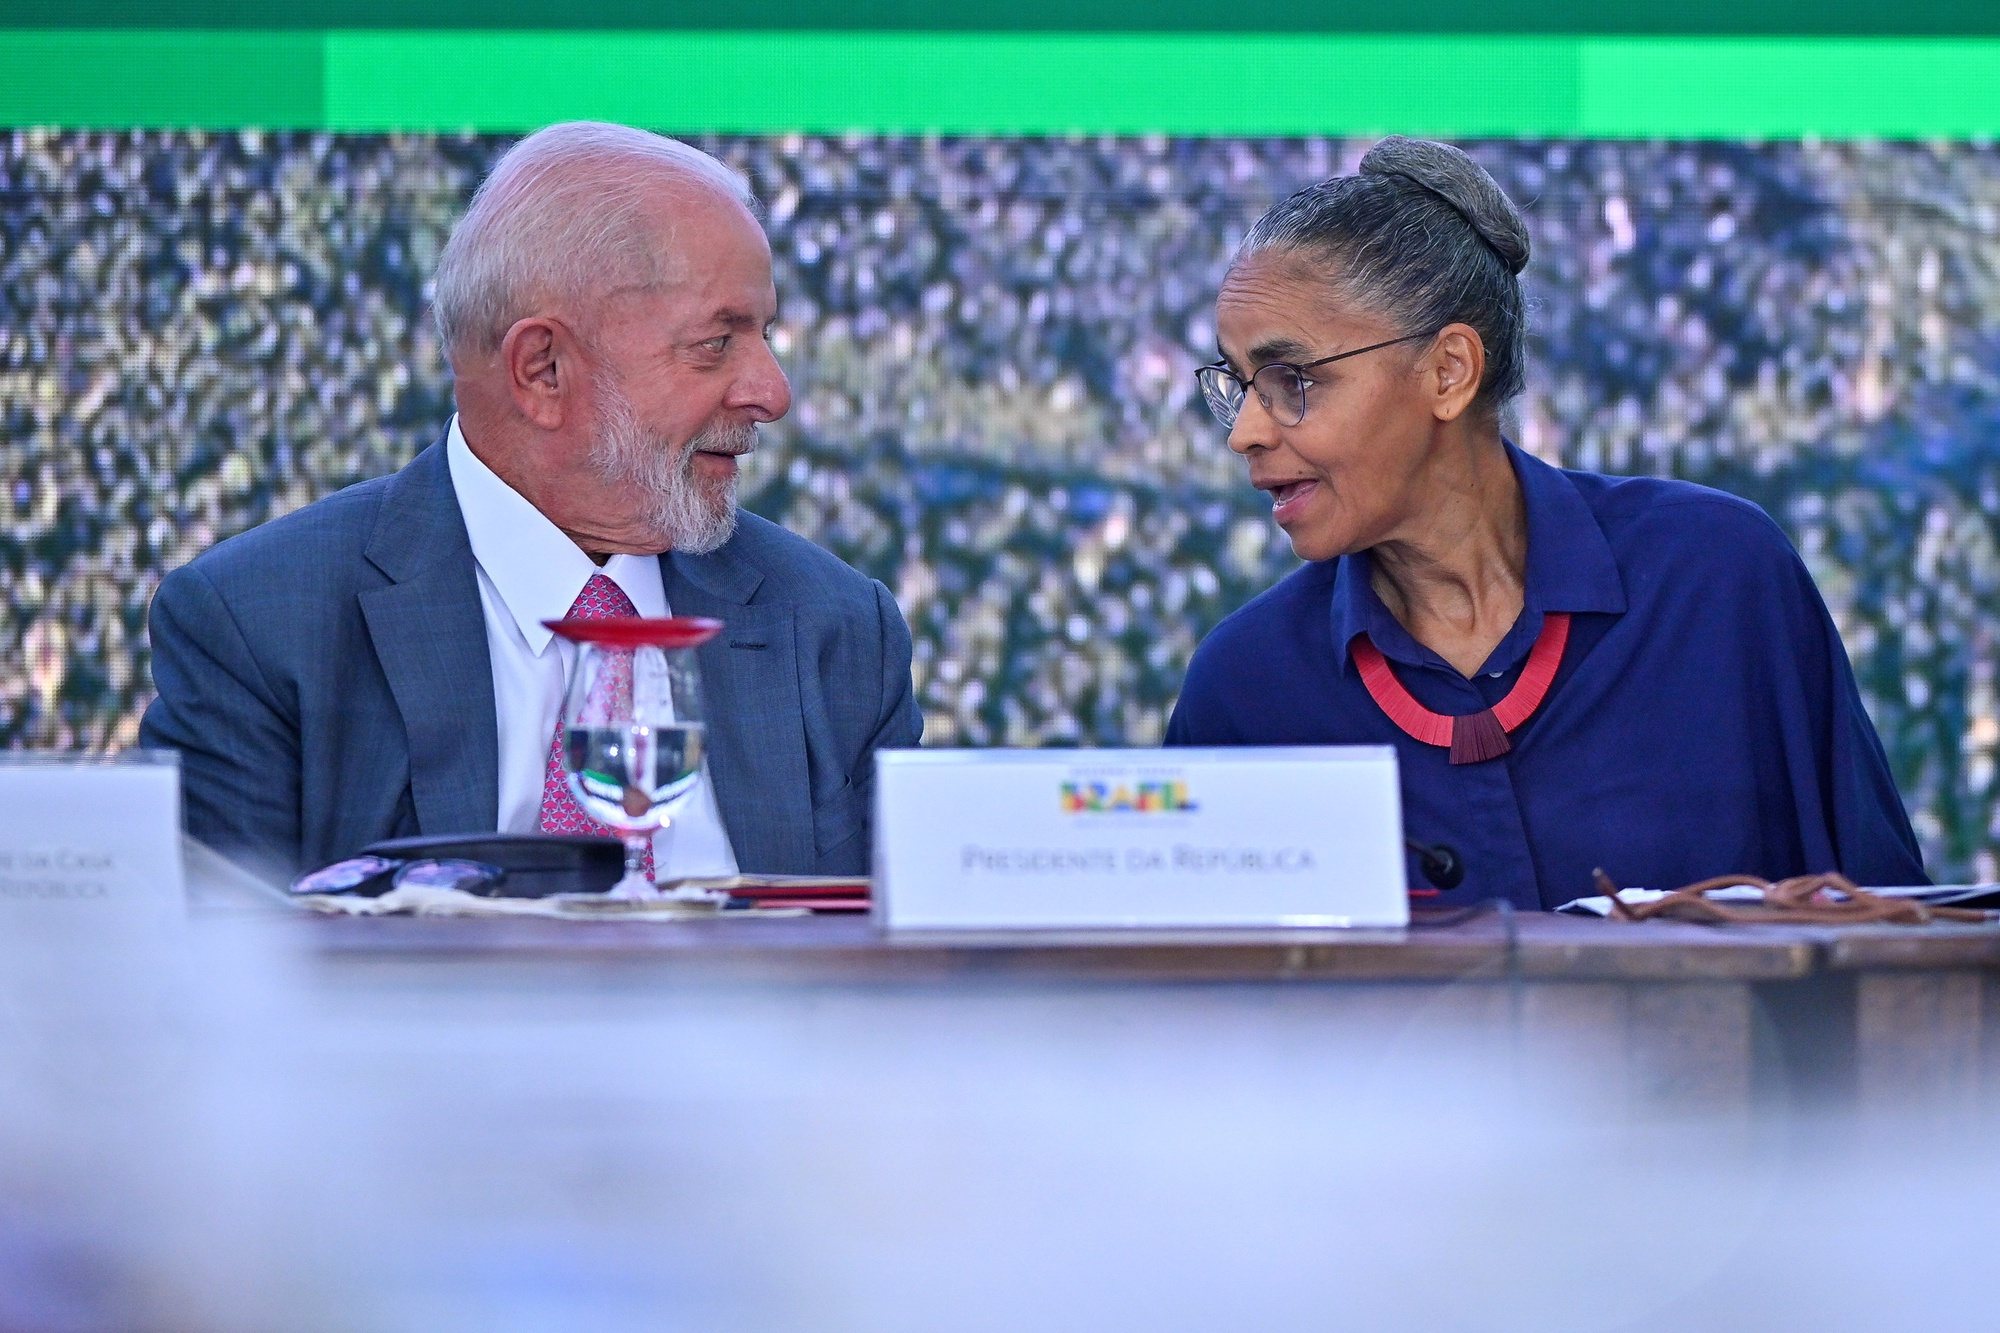 epa11267618 Brazilian President Luiz Inacio Lula da Silva (L) speaks with Brazil&#039;s Minister of the Environment and Climate Change, Marina Silva (R), during the launch of the Union with Municipalities program, aimed at the reduction of deforestation and forest fires in the Amazon, at the Palacio del Planalto in Brasilia, Brazil, 09 April 2024. Da Silva introduced the new program designed to combat deforestation in the Amazon at a ceremony attended by dozens of mayors of Amazonian municipalities. The program will offer financial assistance to municipalities that participate in protecting the biome.  EPA/Andre Borges